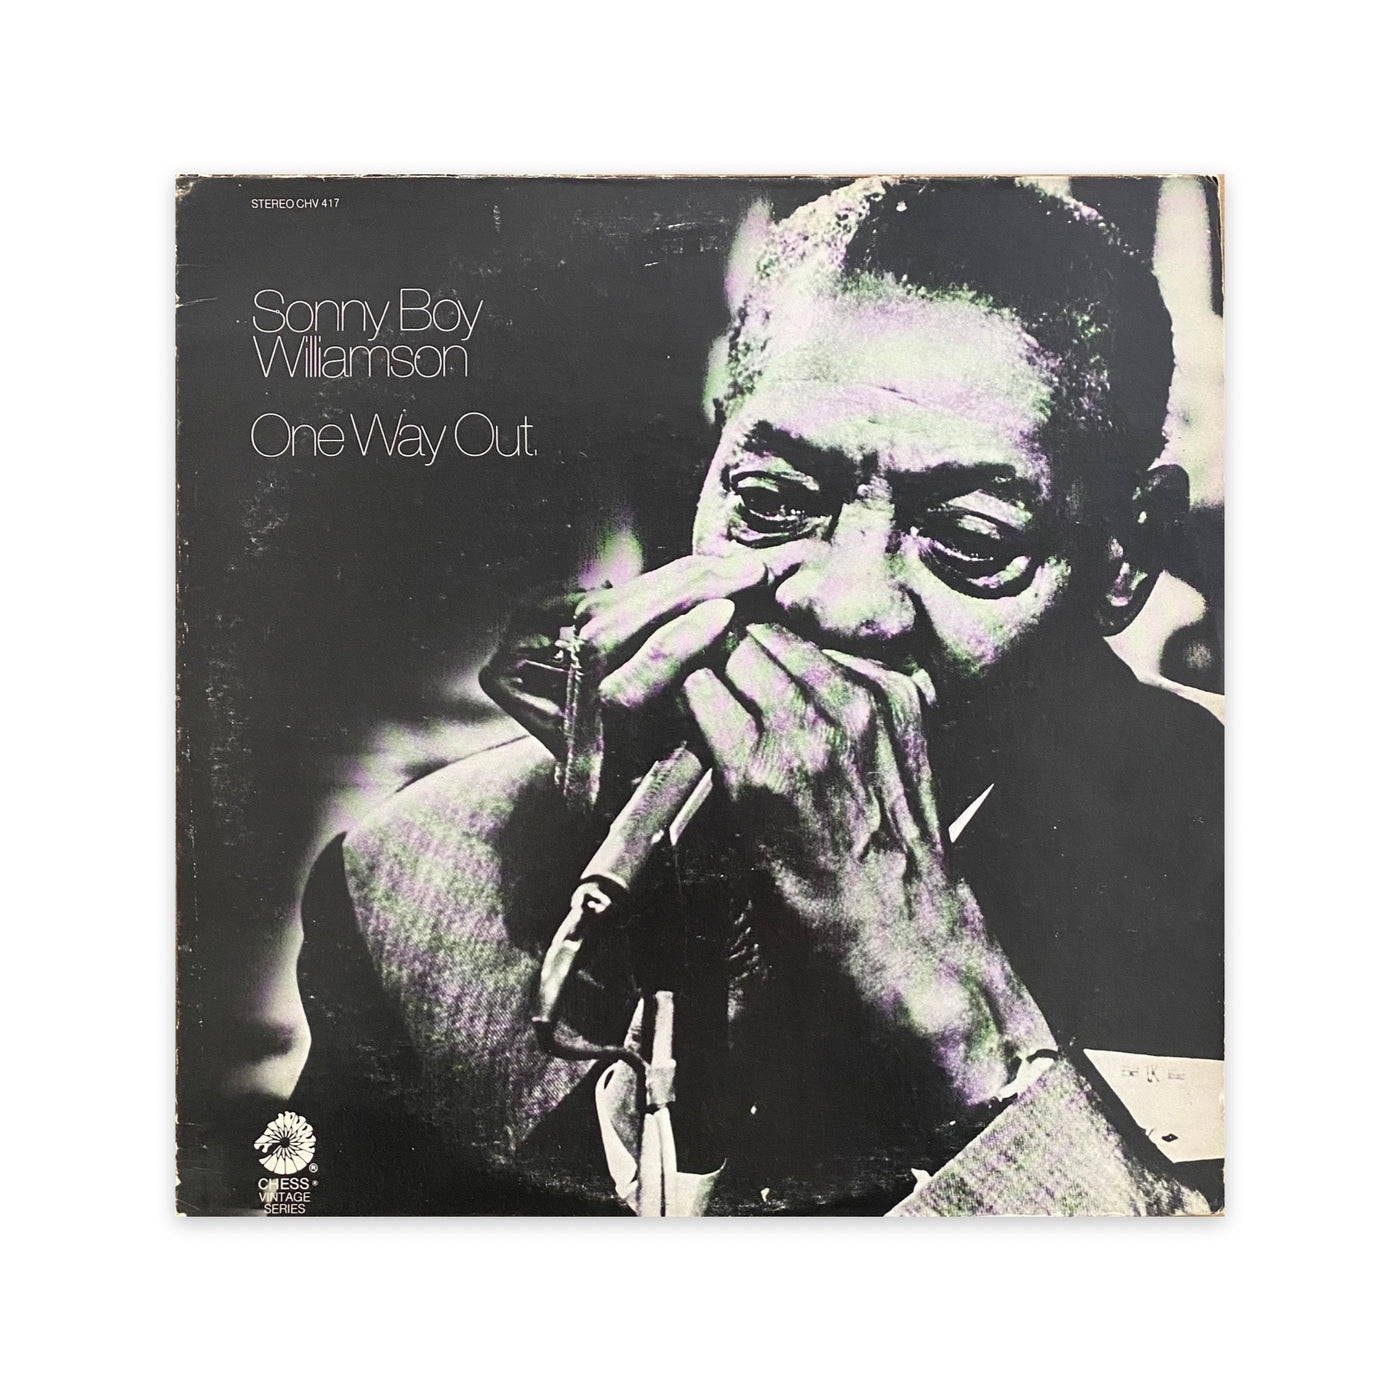 Sonny Boy Williamson - One Way Out